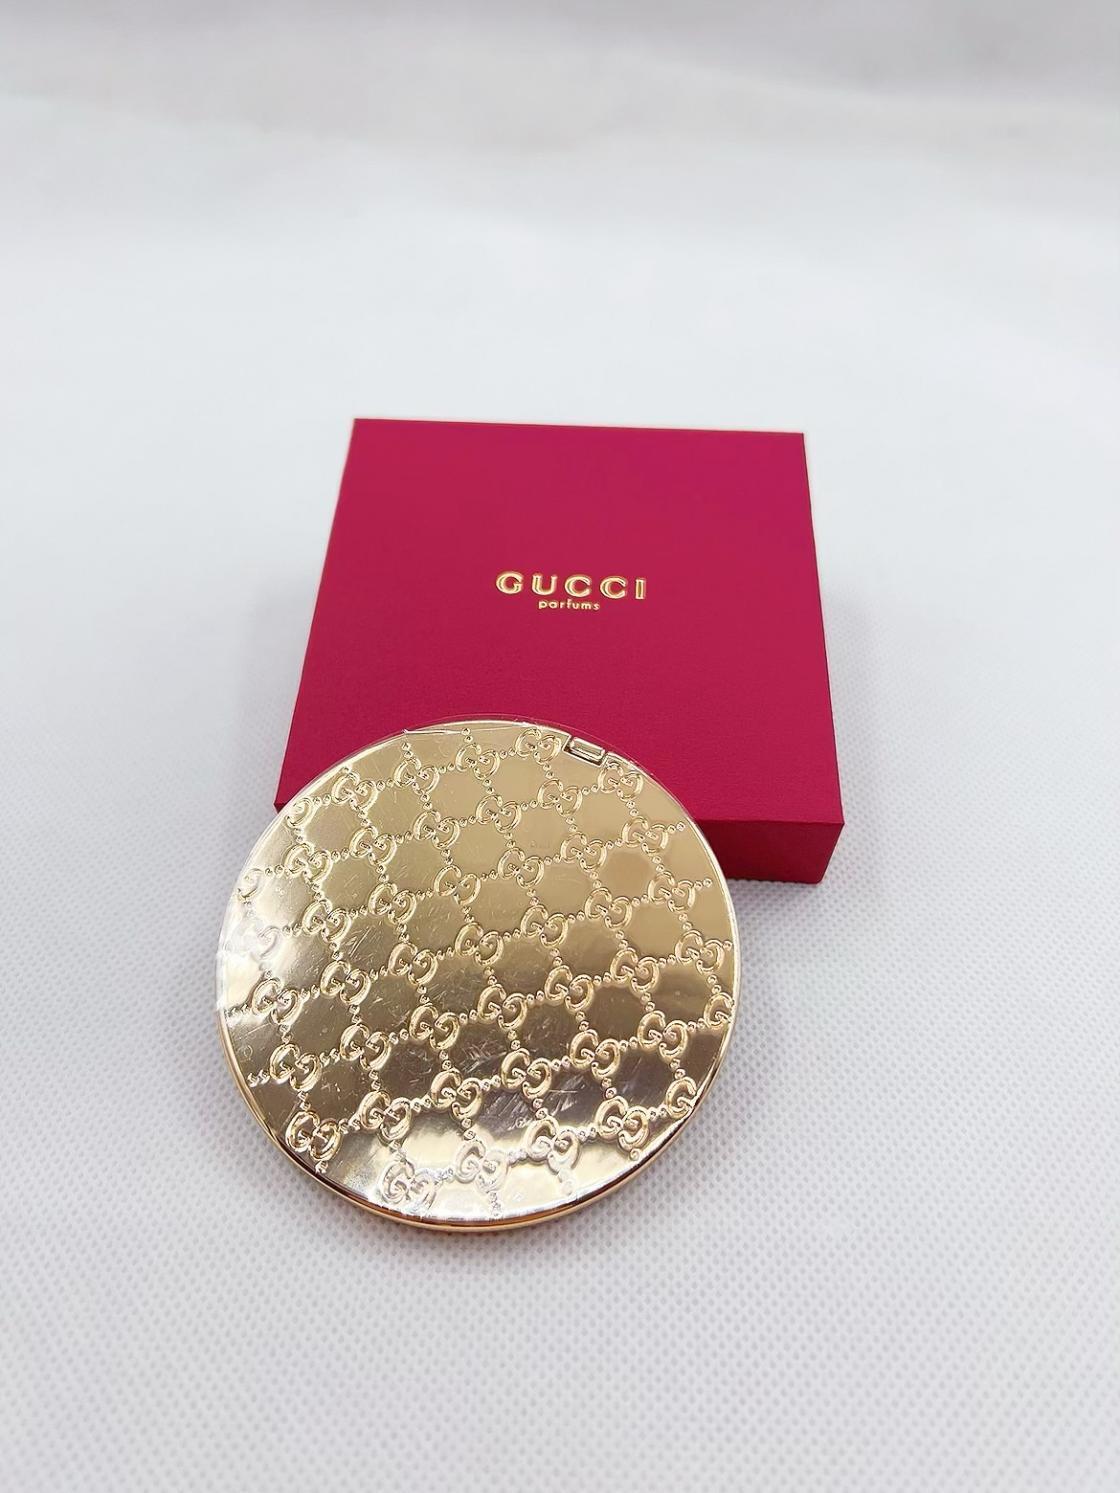 Gucci Beauty Compact NEW Double-sided pocket MakeUp Mirror in Box